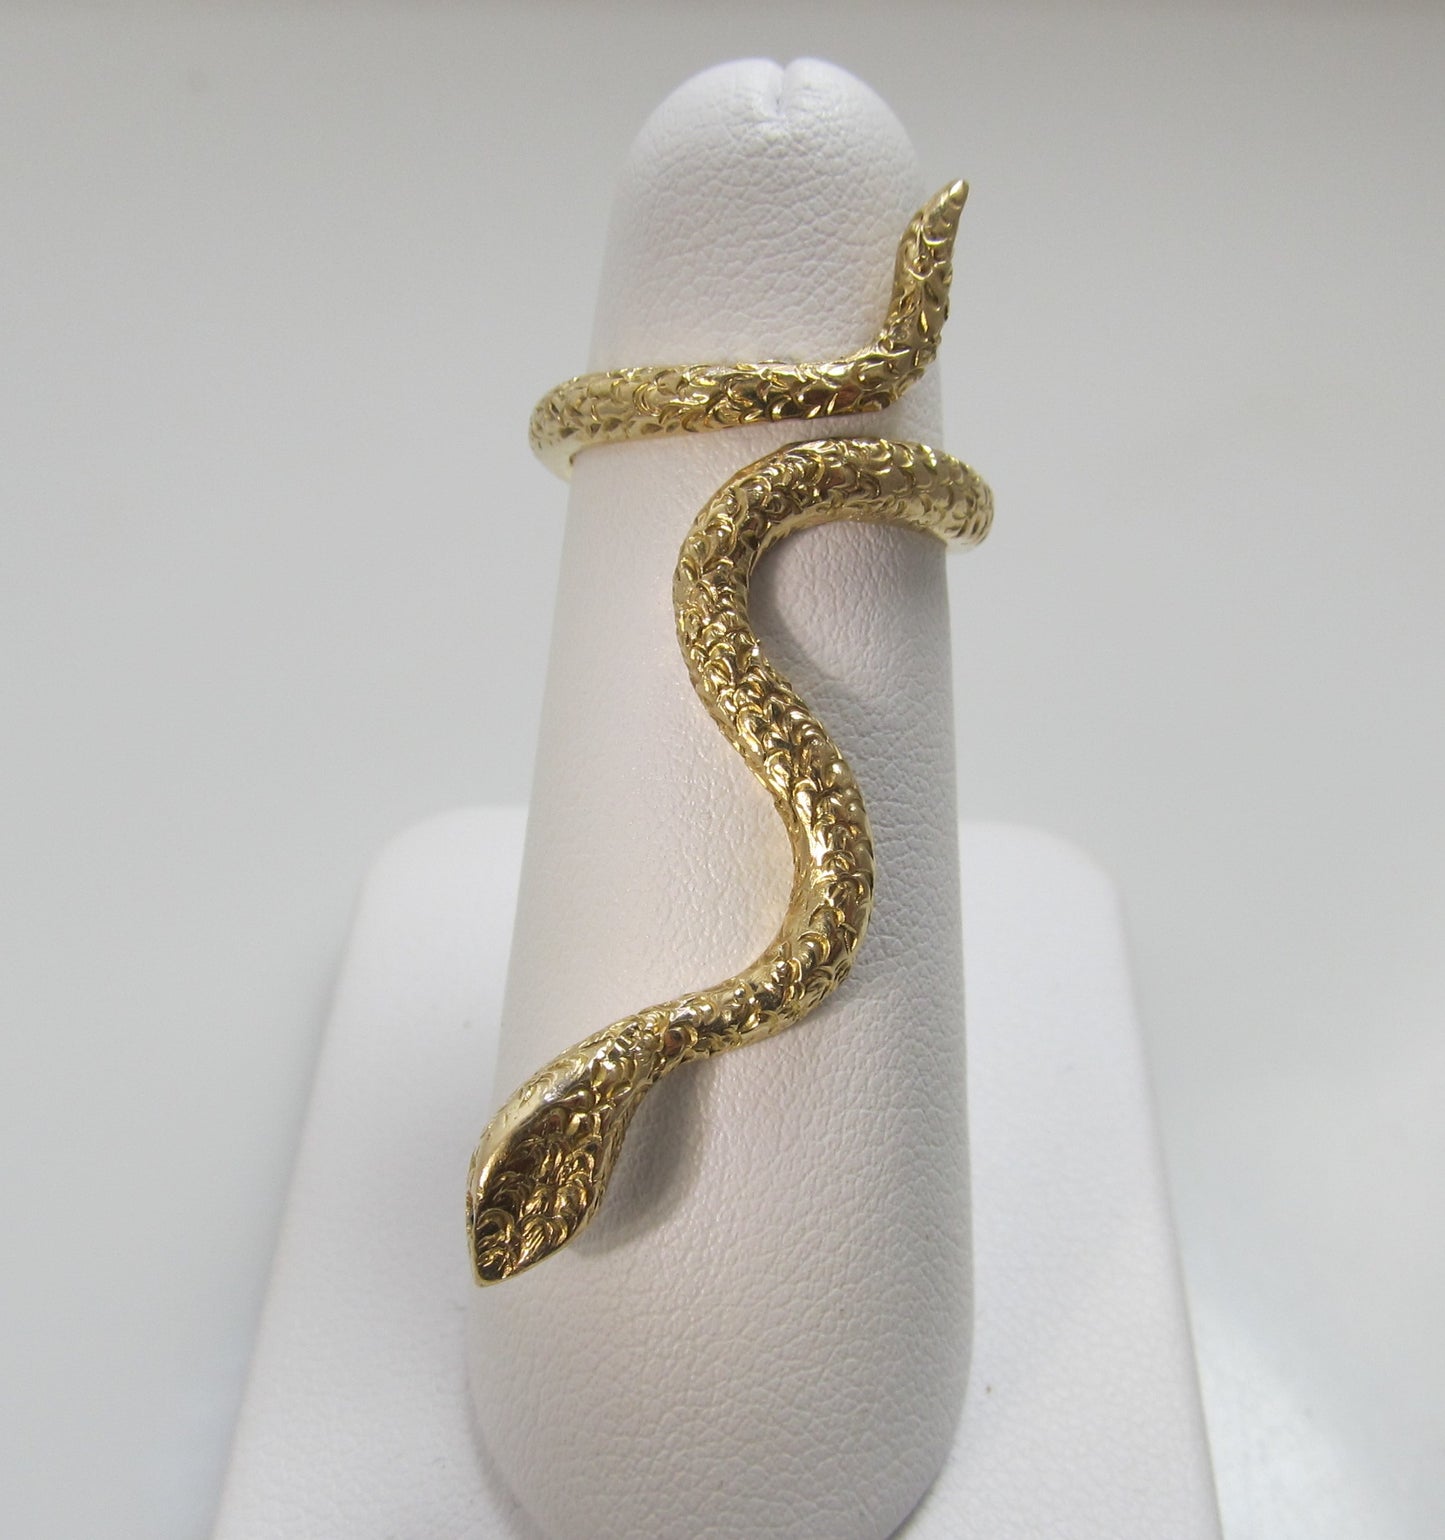 Neat vintage long snake ring with sapphire eyes